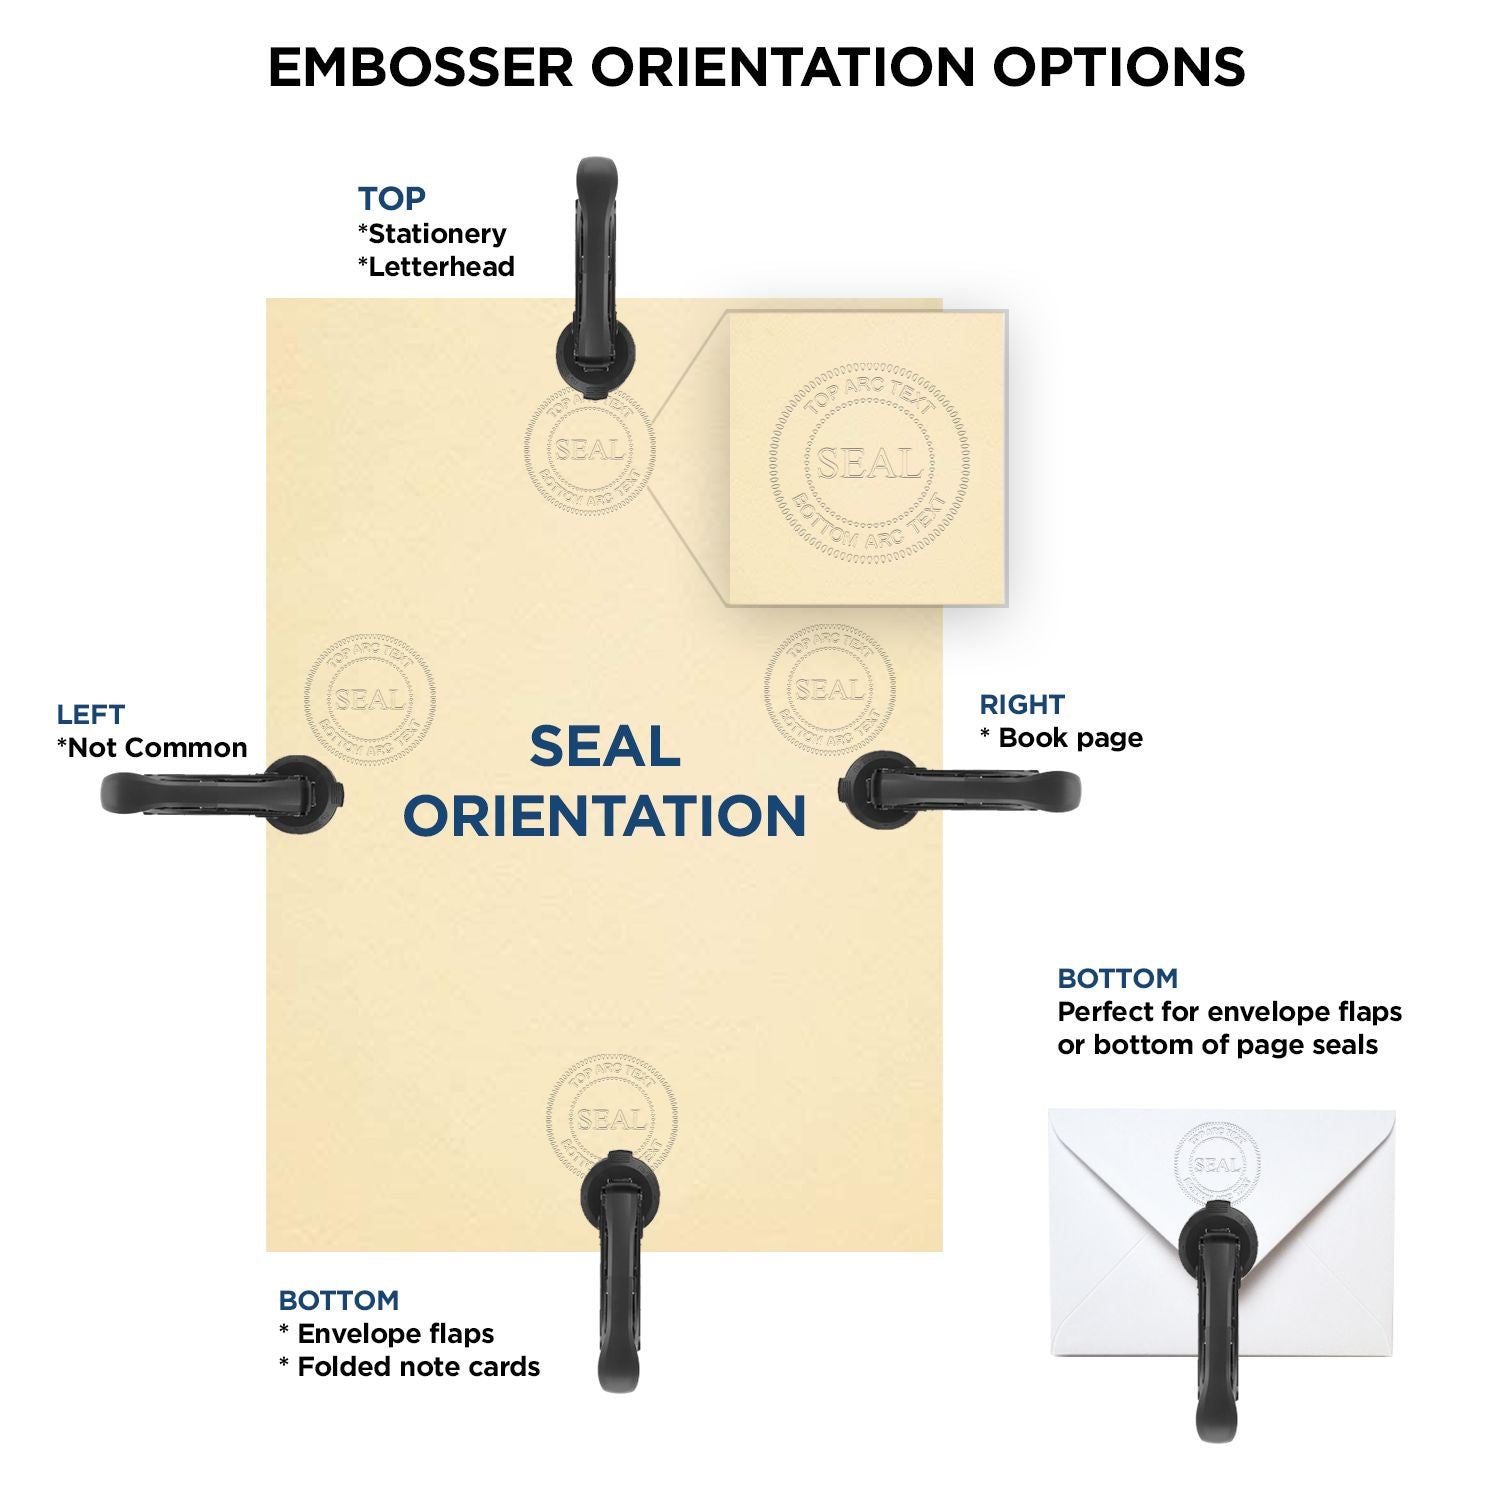 An infographic for the Long Reach New York Land Surveyor Seal showing embosser orientation, this is showing examples of a top, bottom, right and left insert.